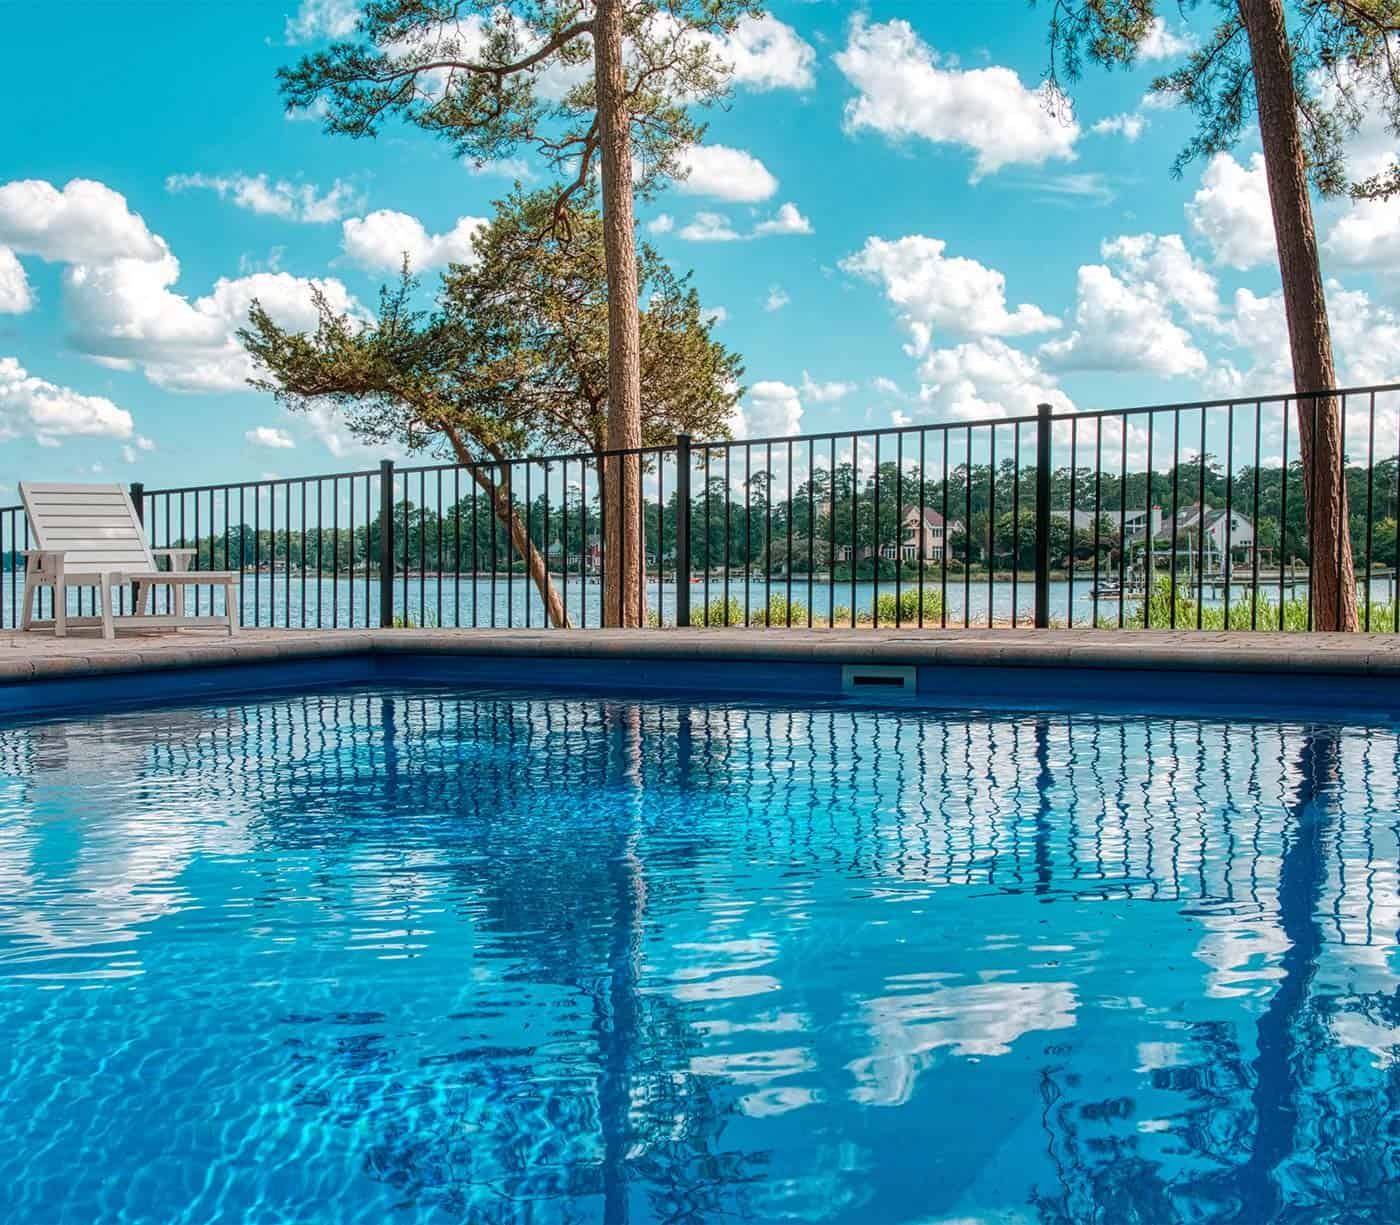 An image of a metal fence designed to protect a pool